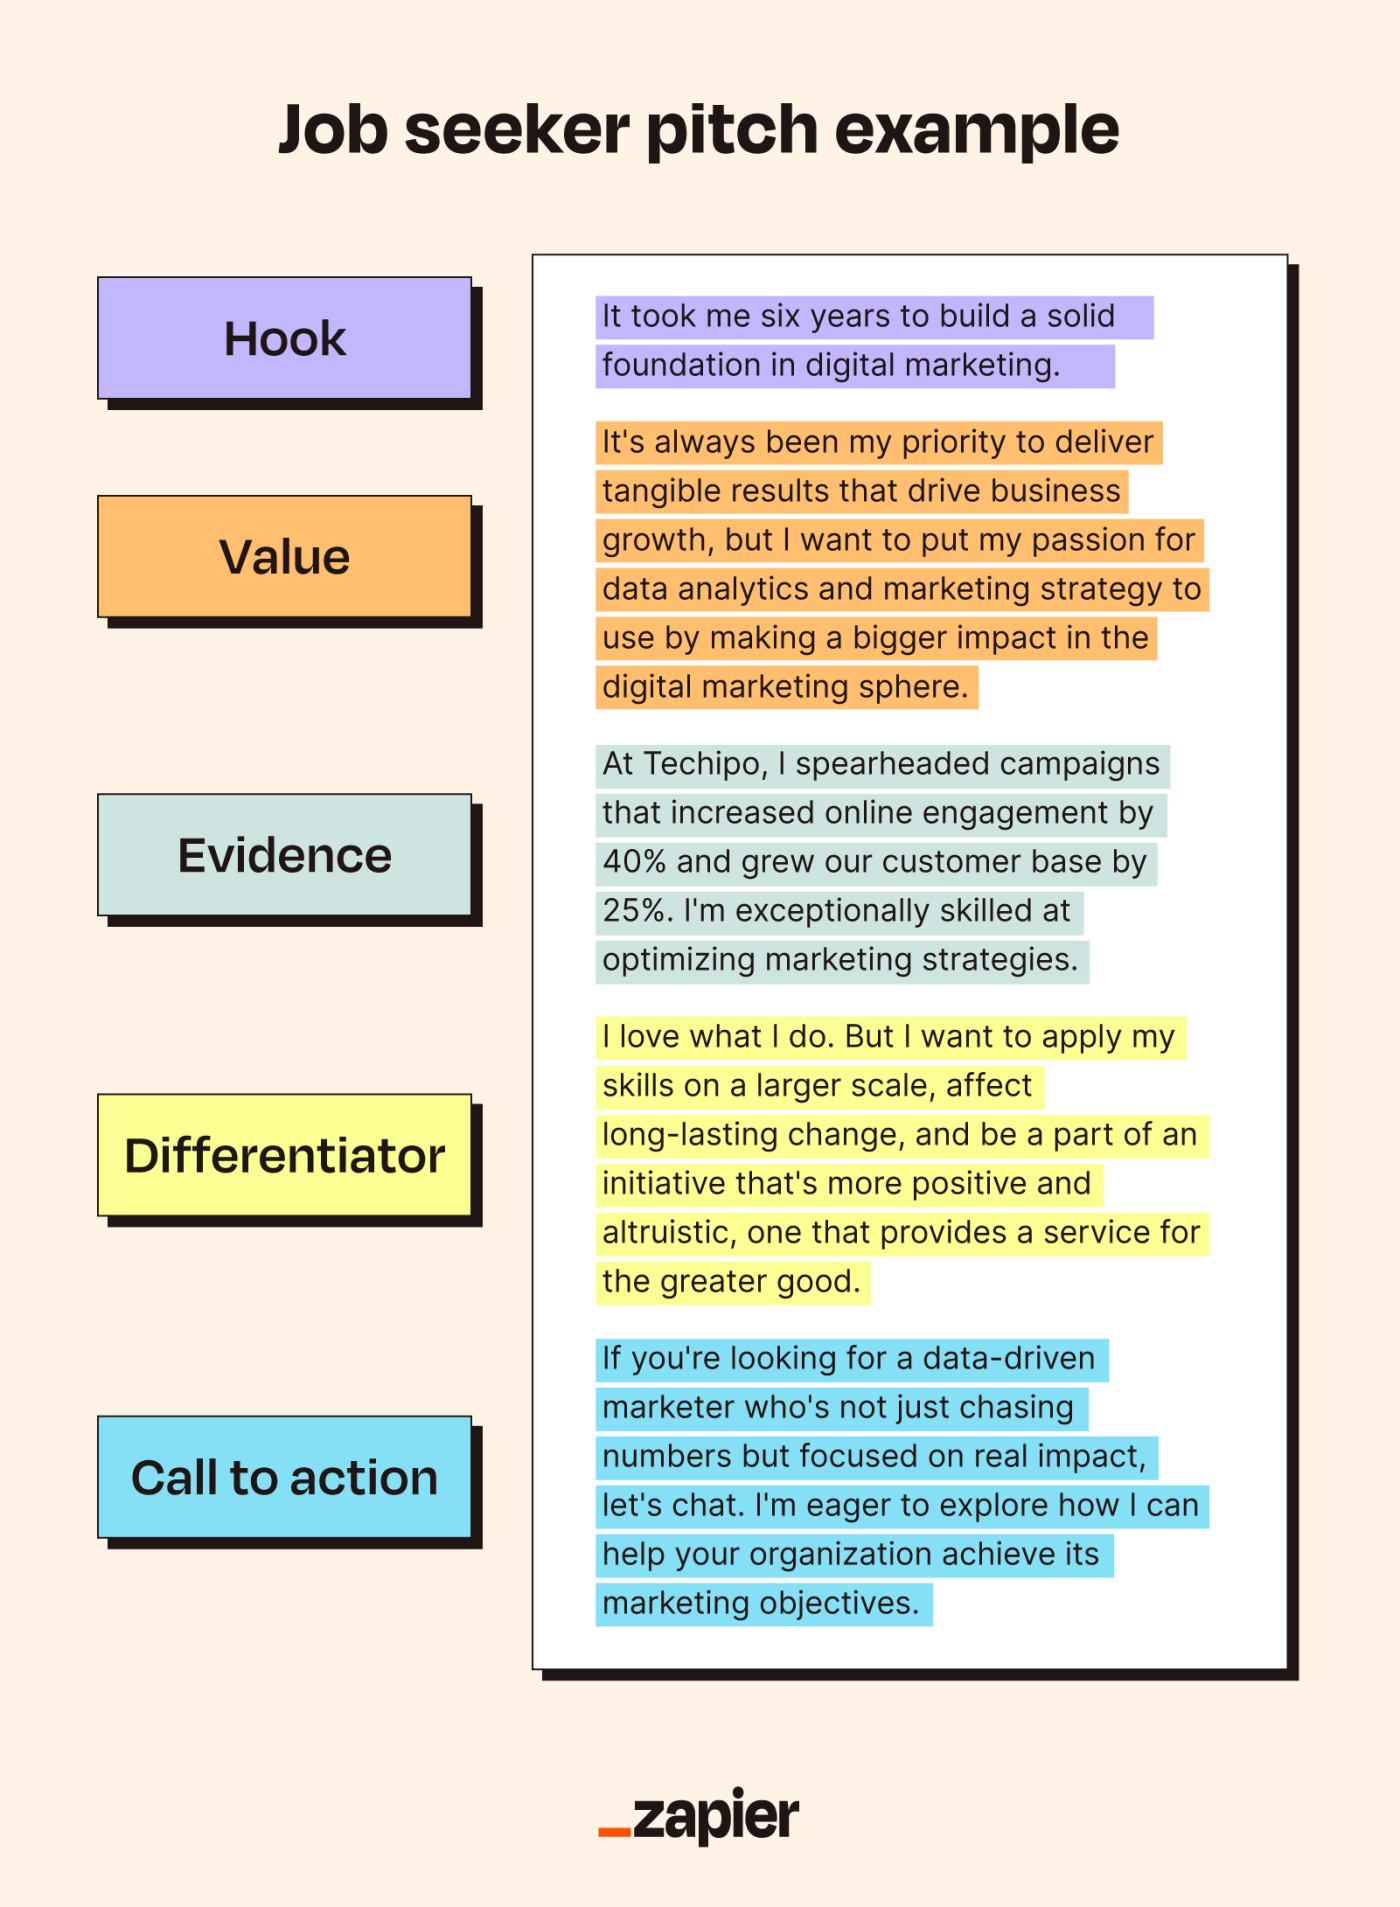 Example of an elevator pitch for a job seeker, with the hook, value, evidence, differentiator, and call to action highlighted in different colors